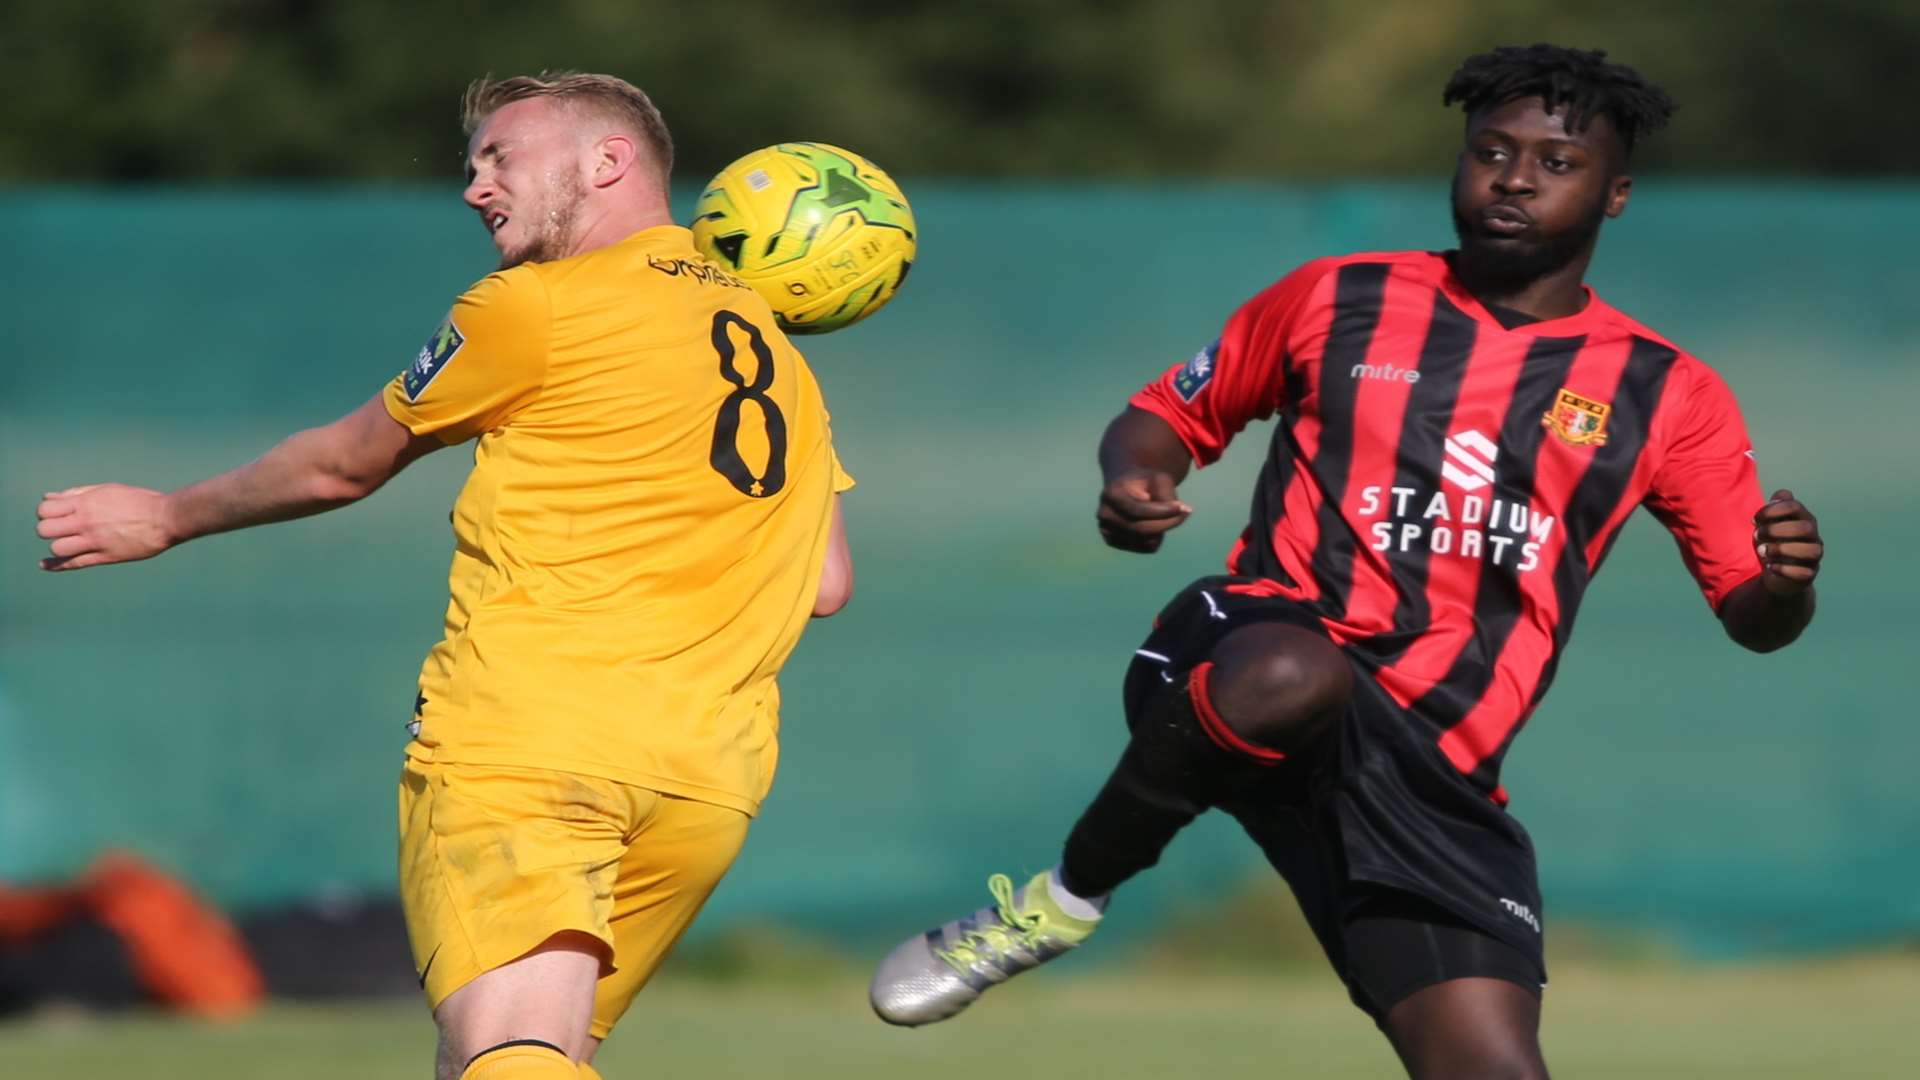 Bola Dawodu has four goals already since his move from Whitstable Picture: John Westhrop